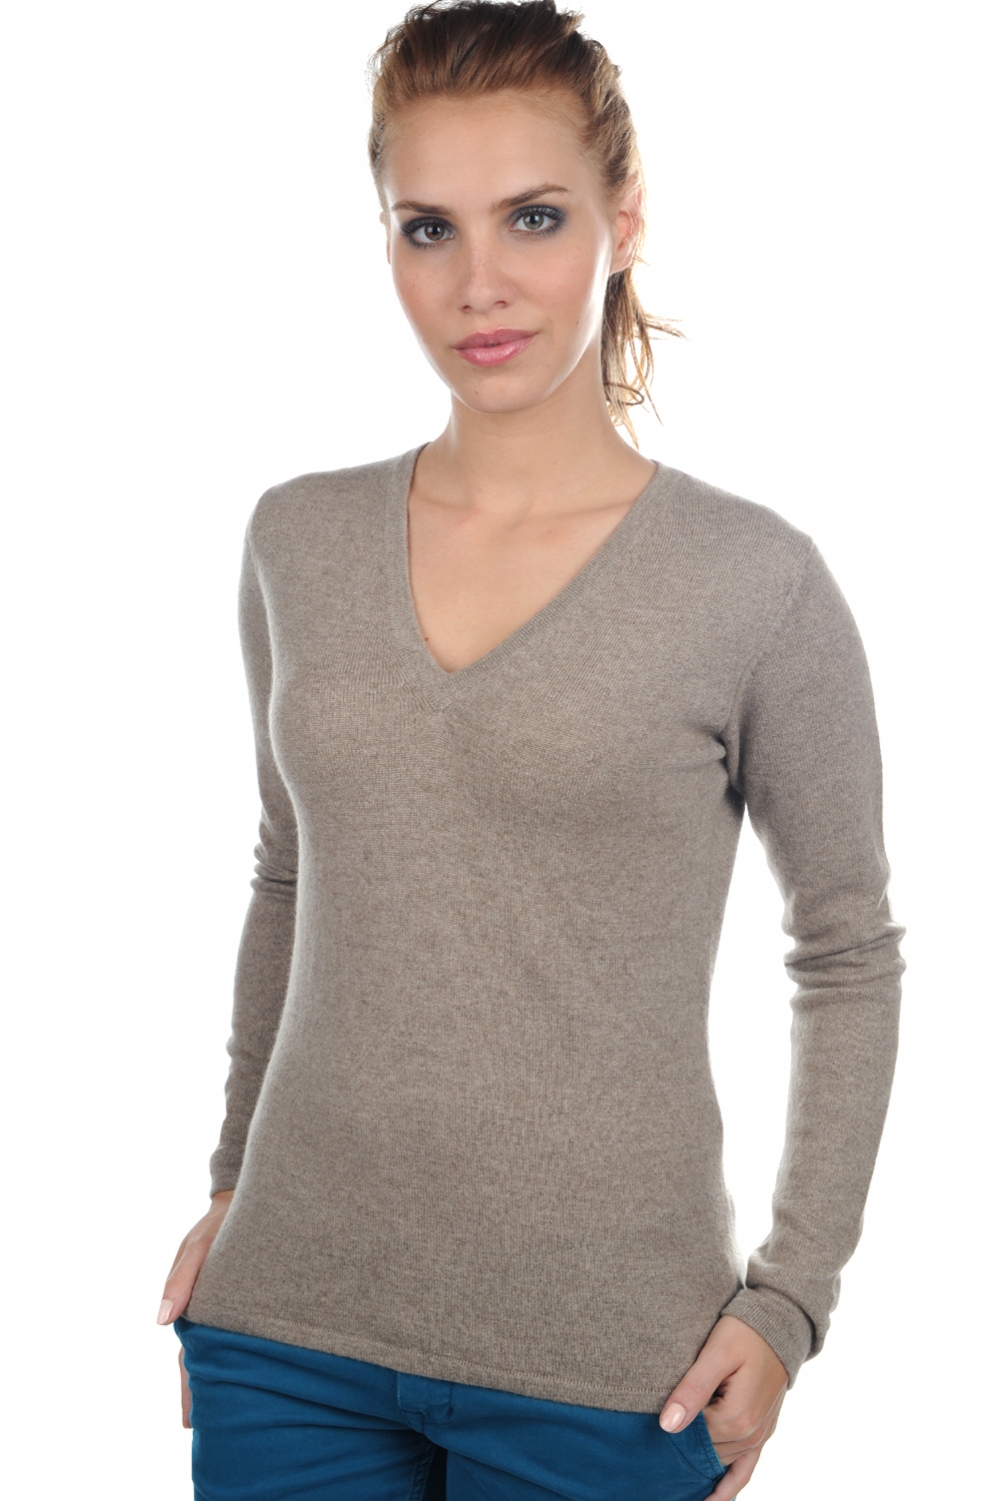 Cashmere ladies timeless classics emma natural brown s